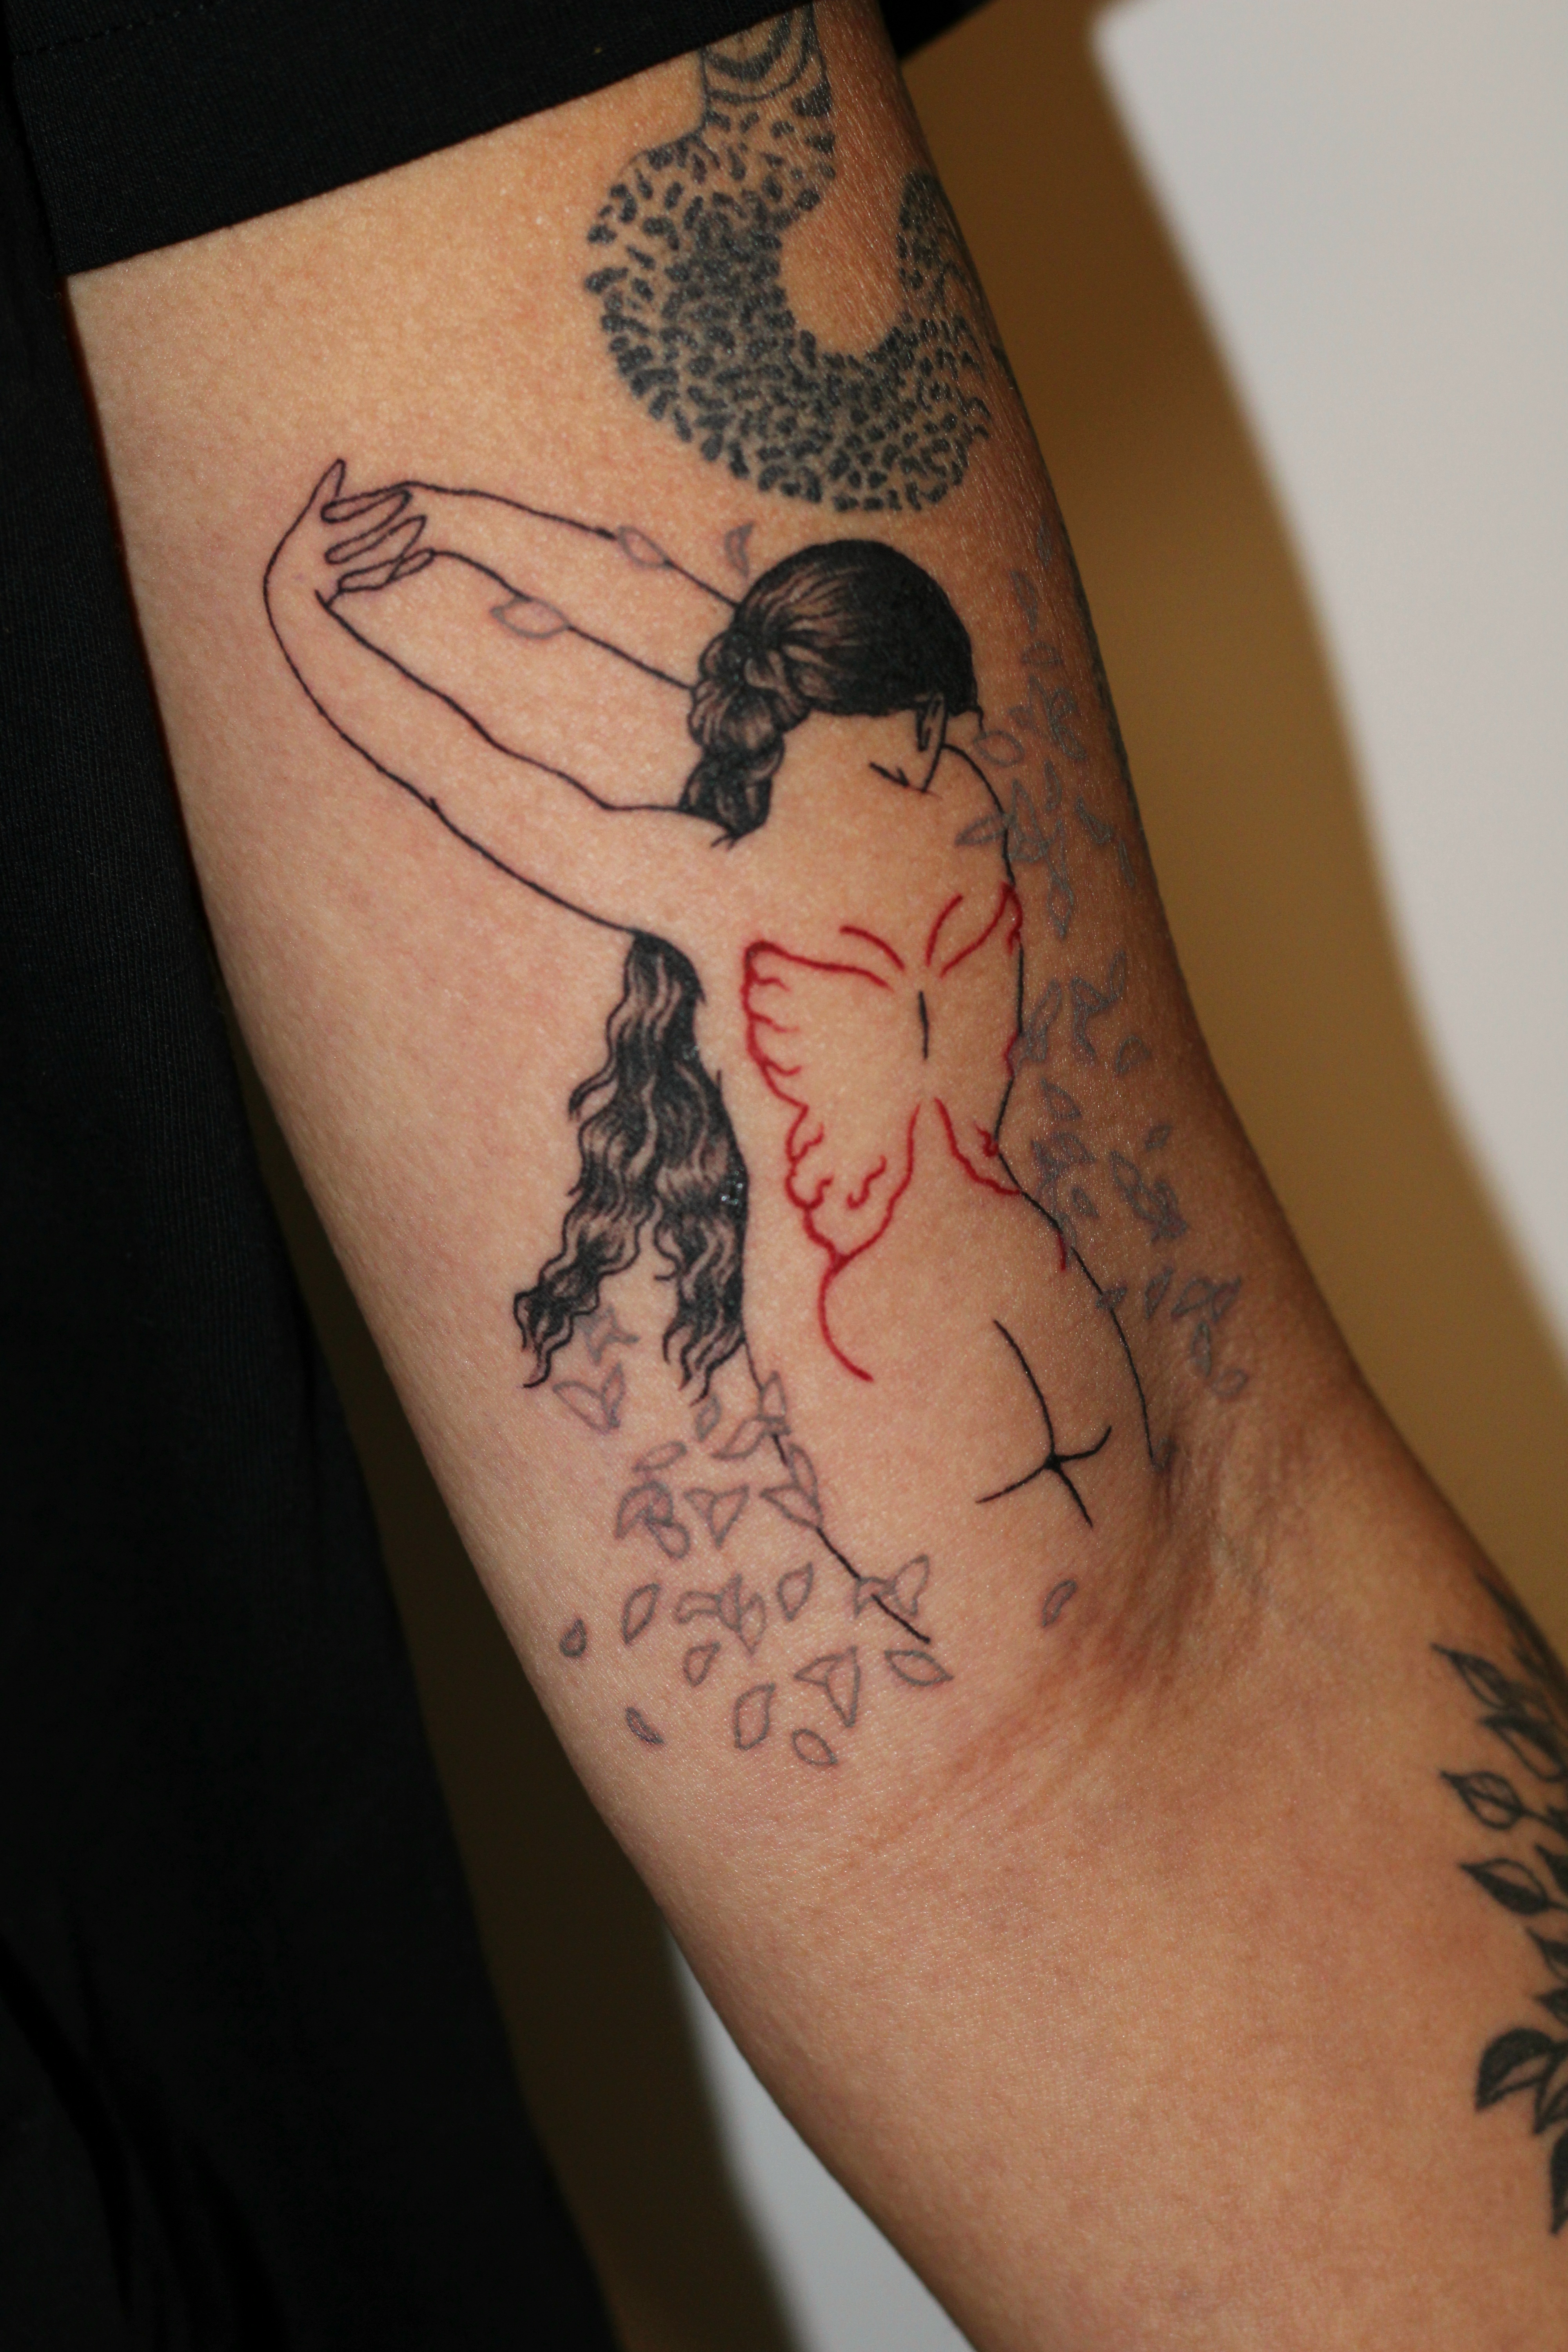 Photo of a tattooed upper arm featuring a naked woman from the back.